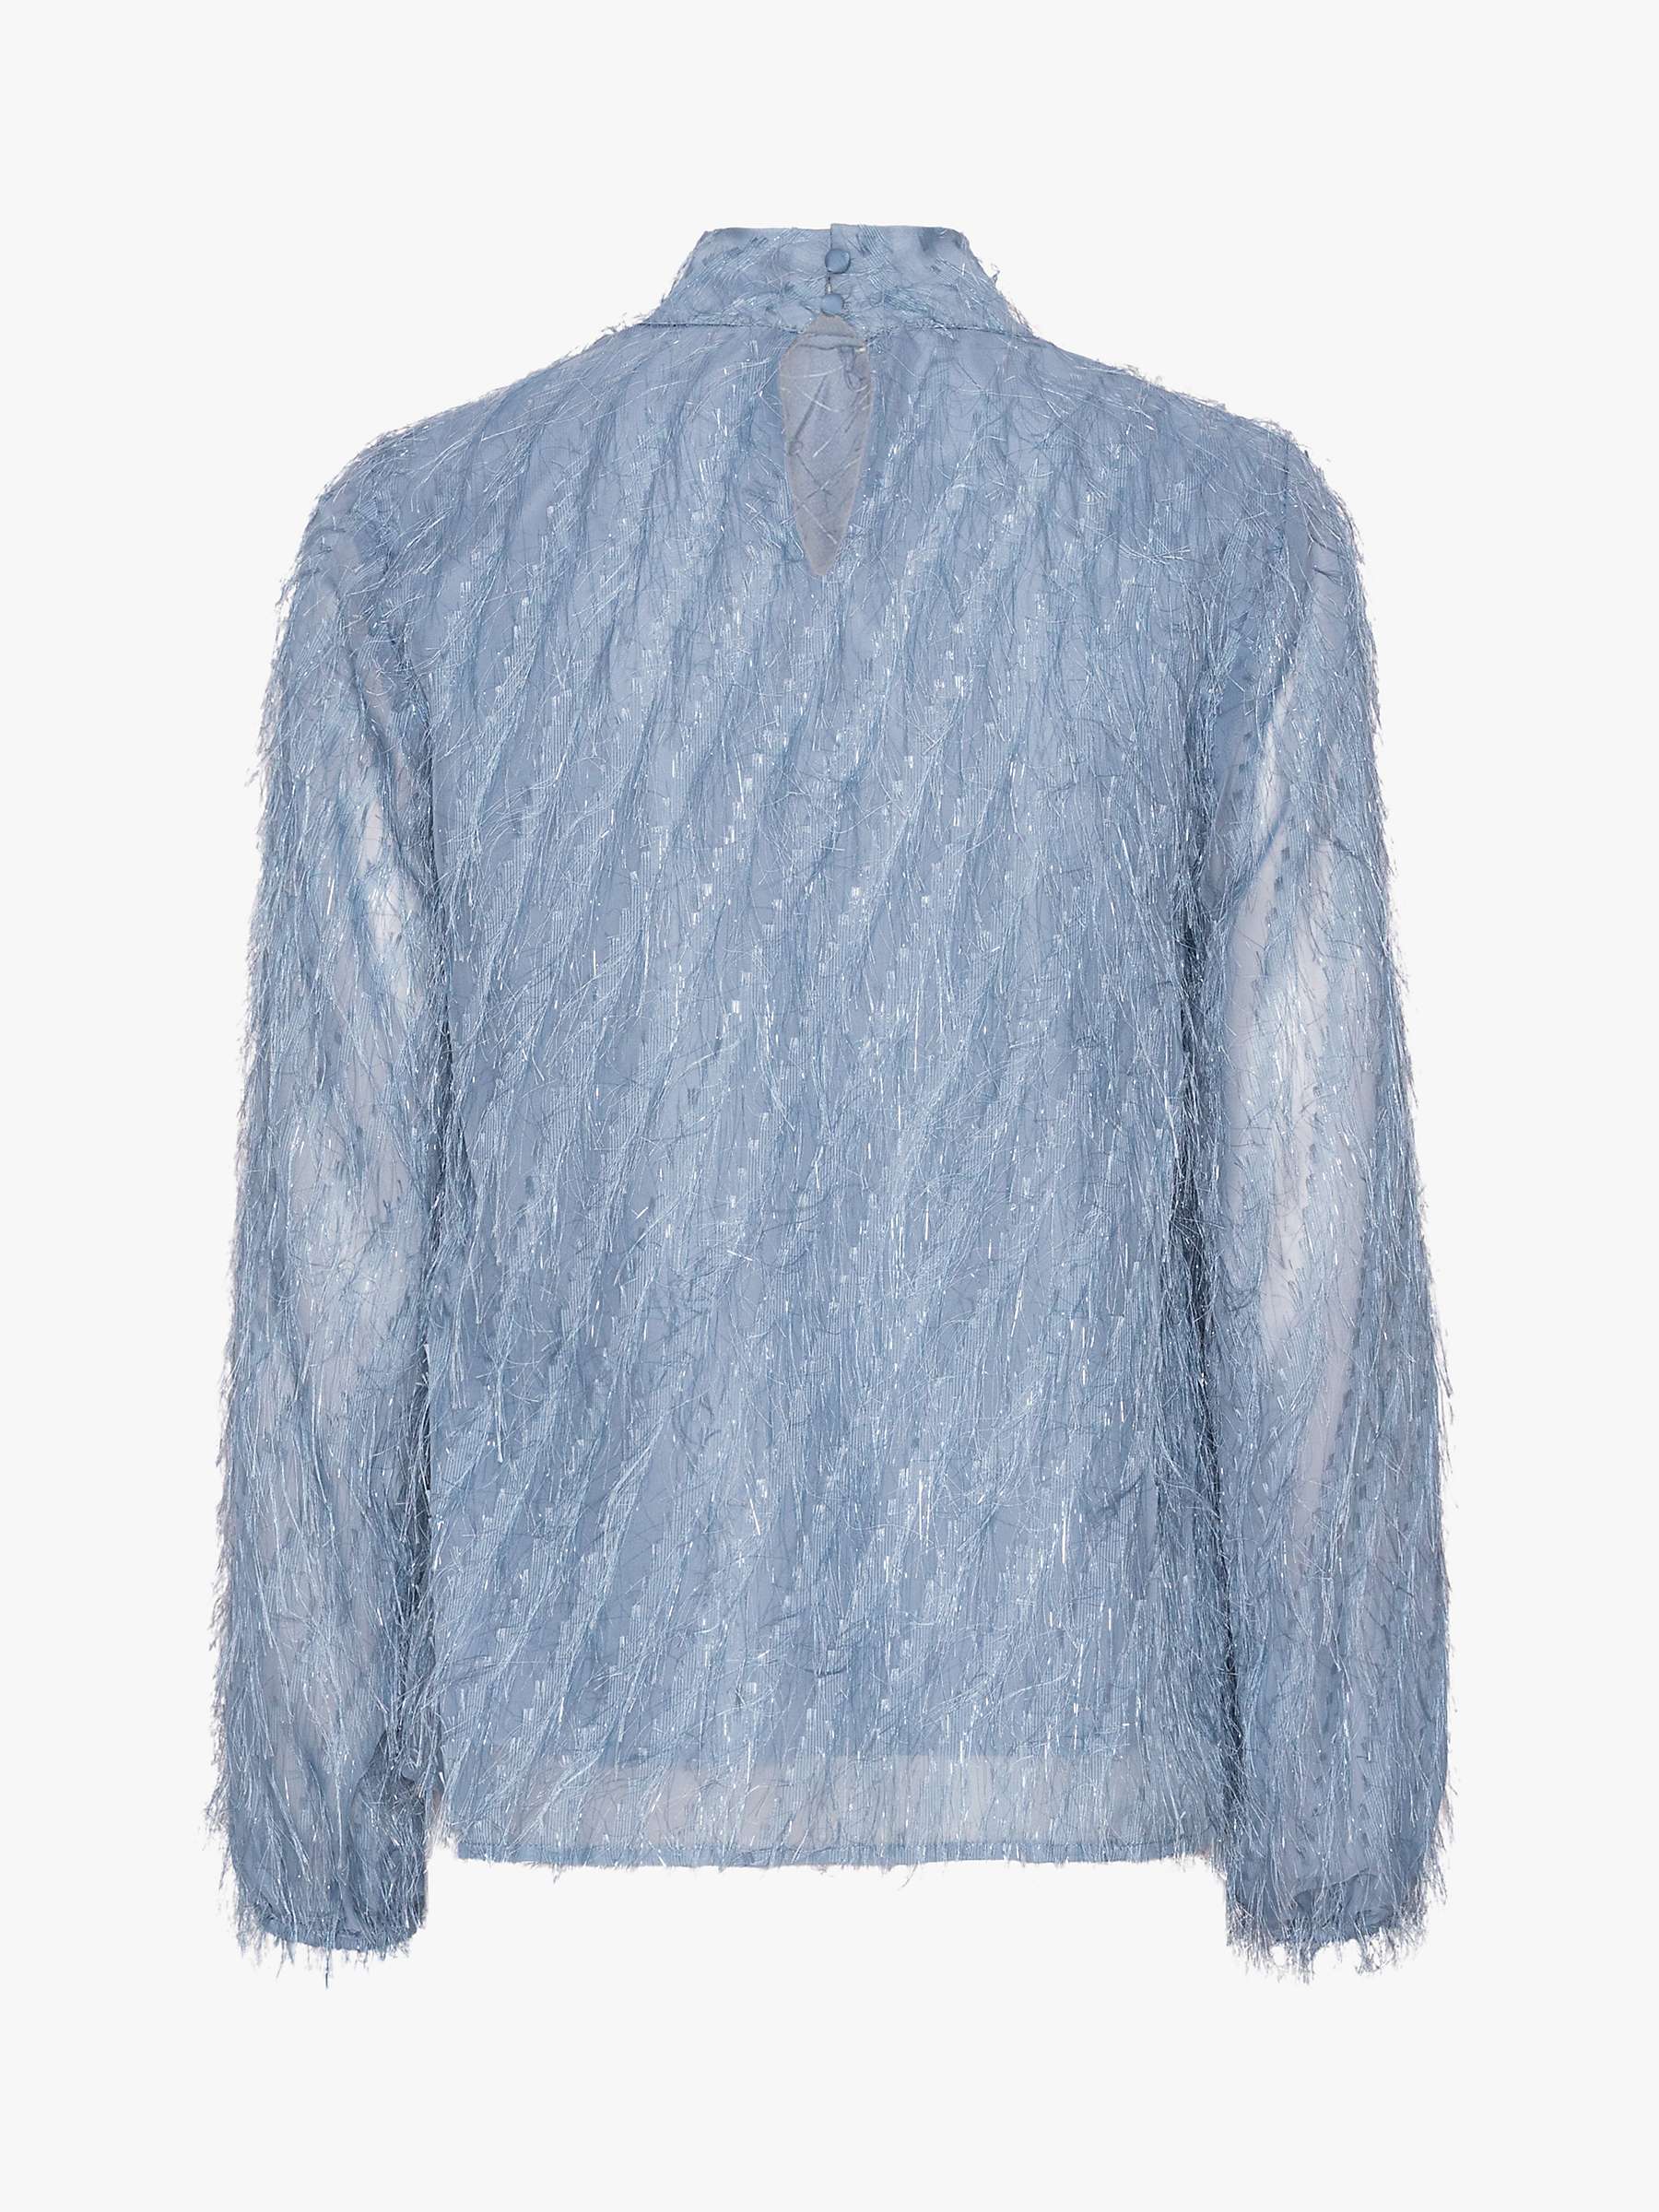 Buy A-VIEW Aiden Long Sleeve Embellished Blouse, Light Blue Online at johnlewis.com